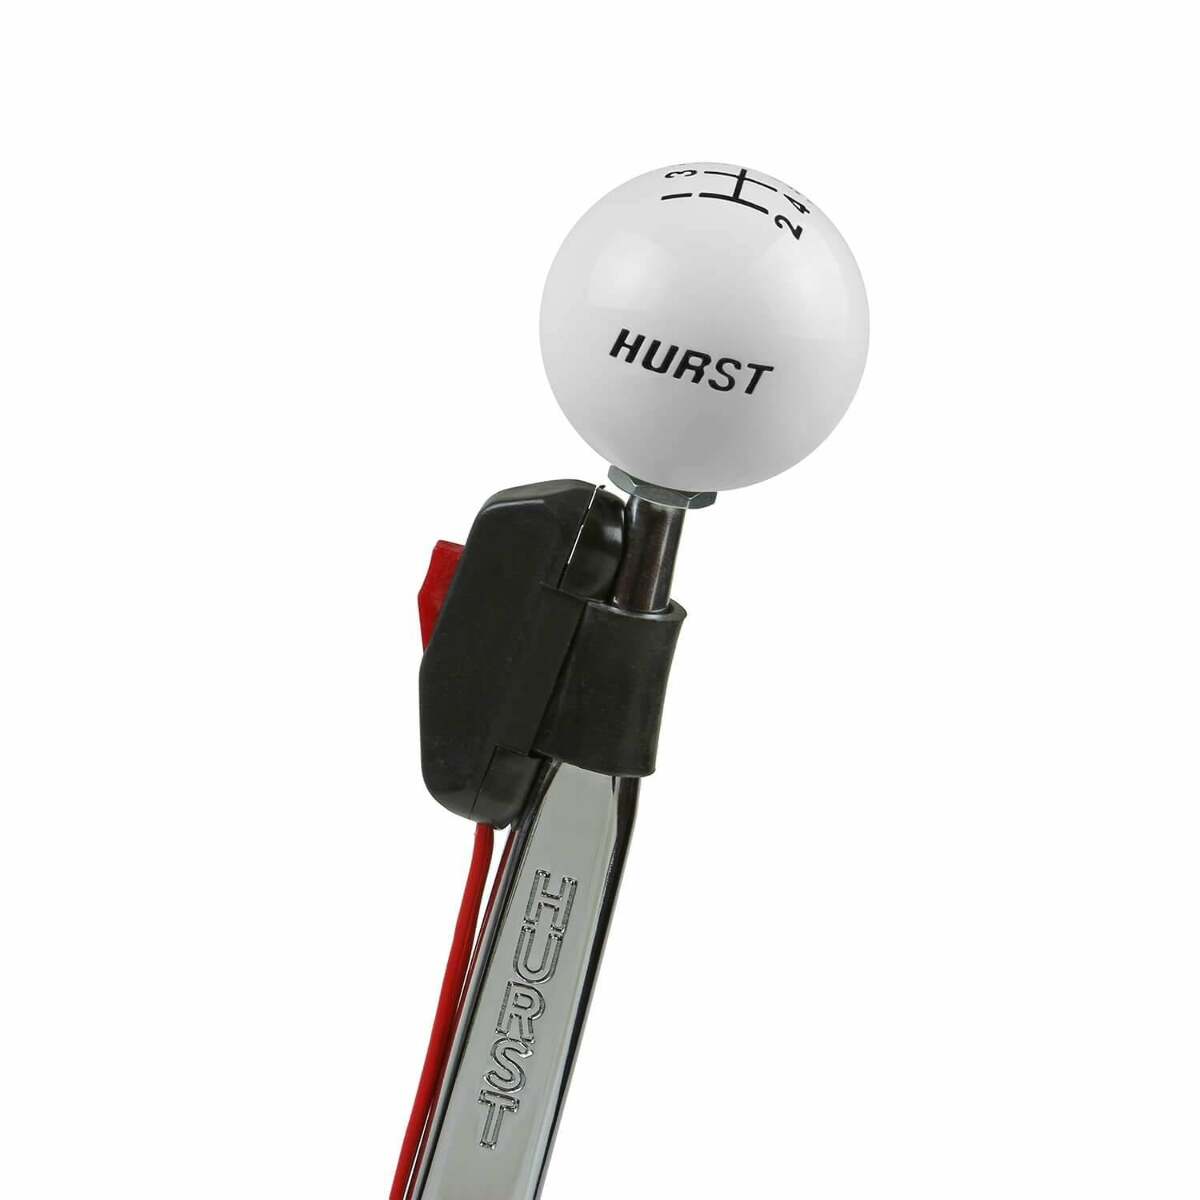 Hurst Roll/Control, Line/Loc Momentary Button Switch - 2483875